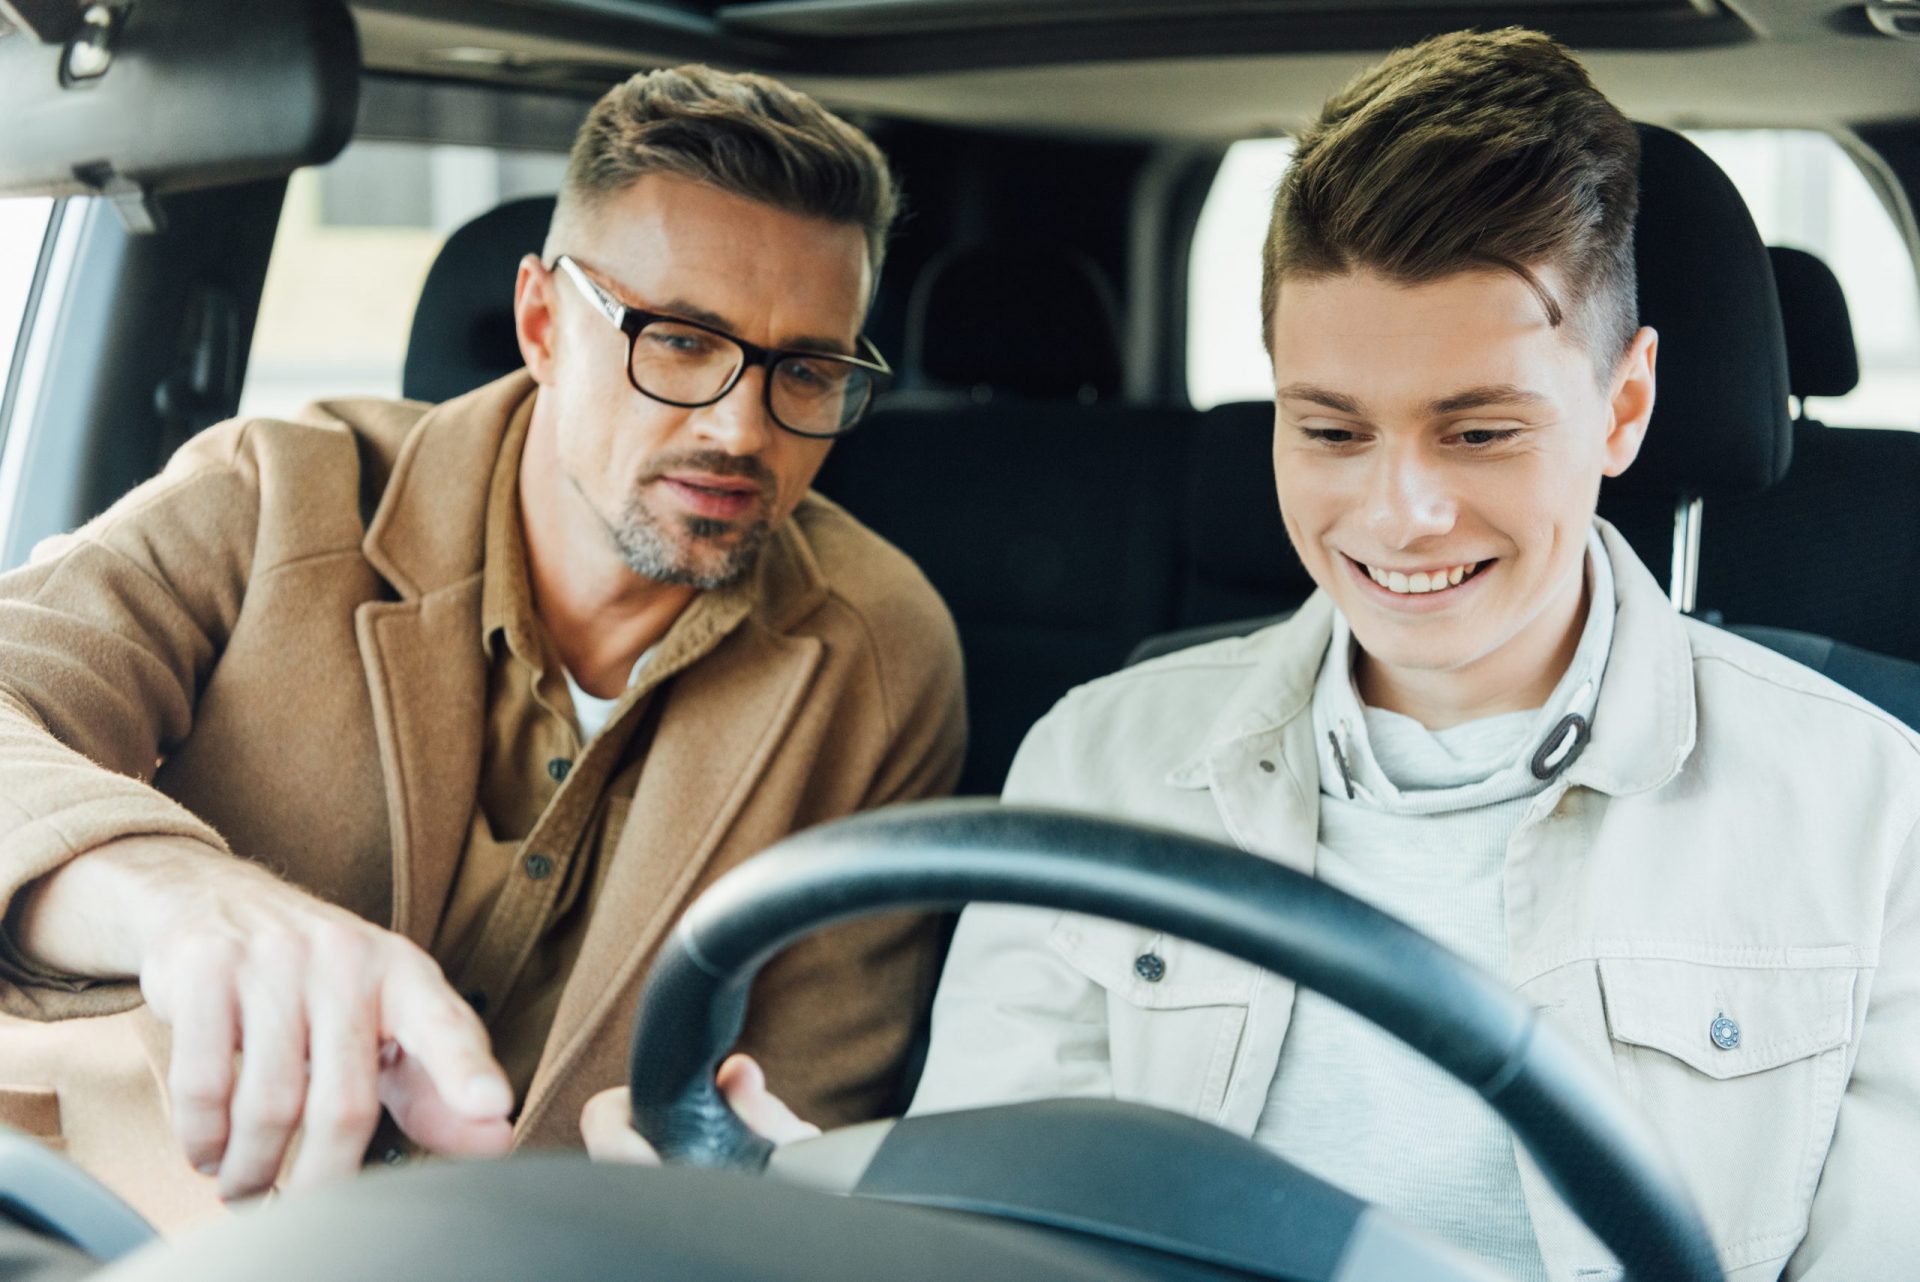 Teen Driving Safety Tips for Families scaled 1